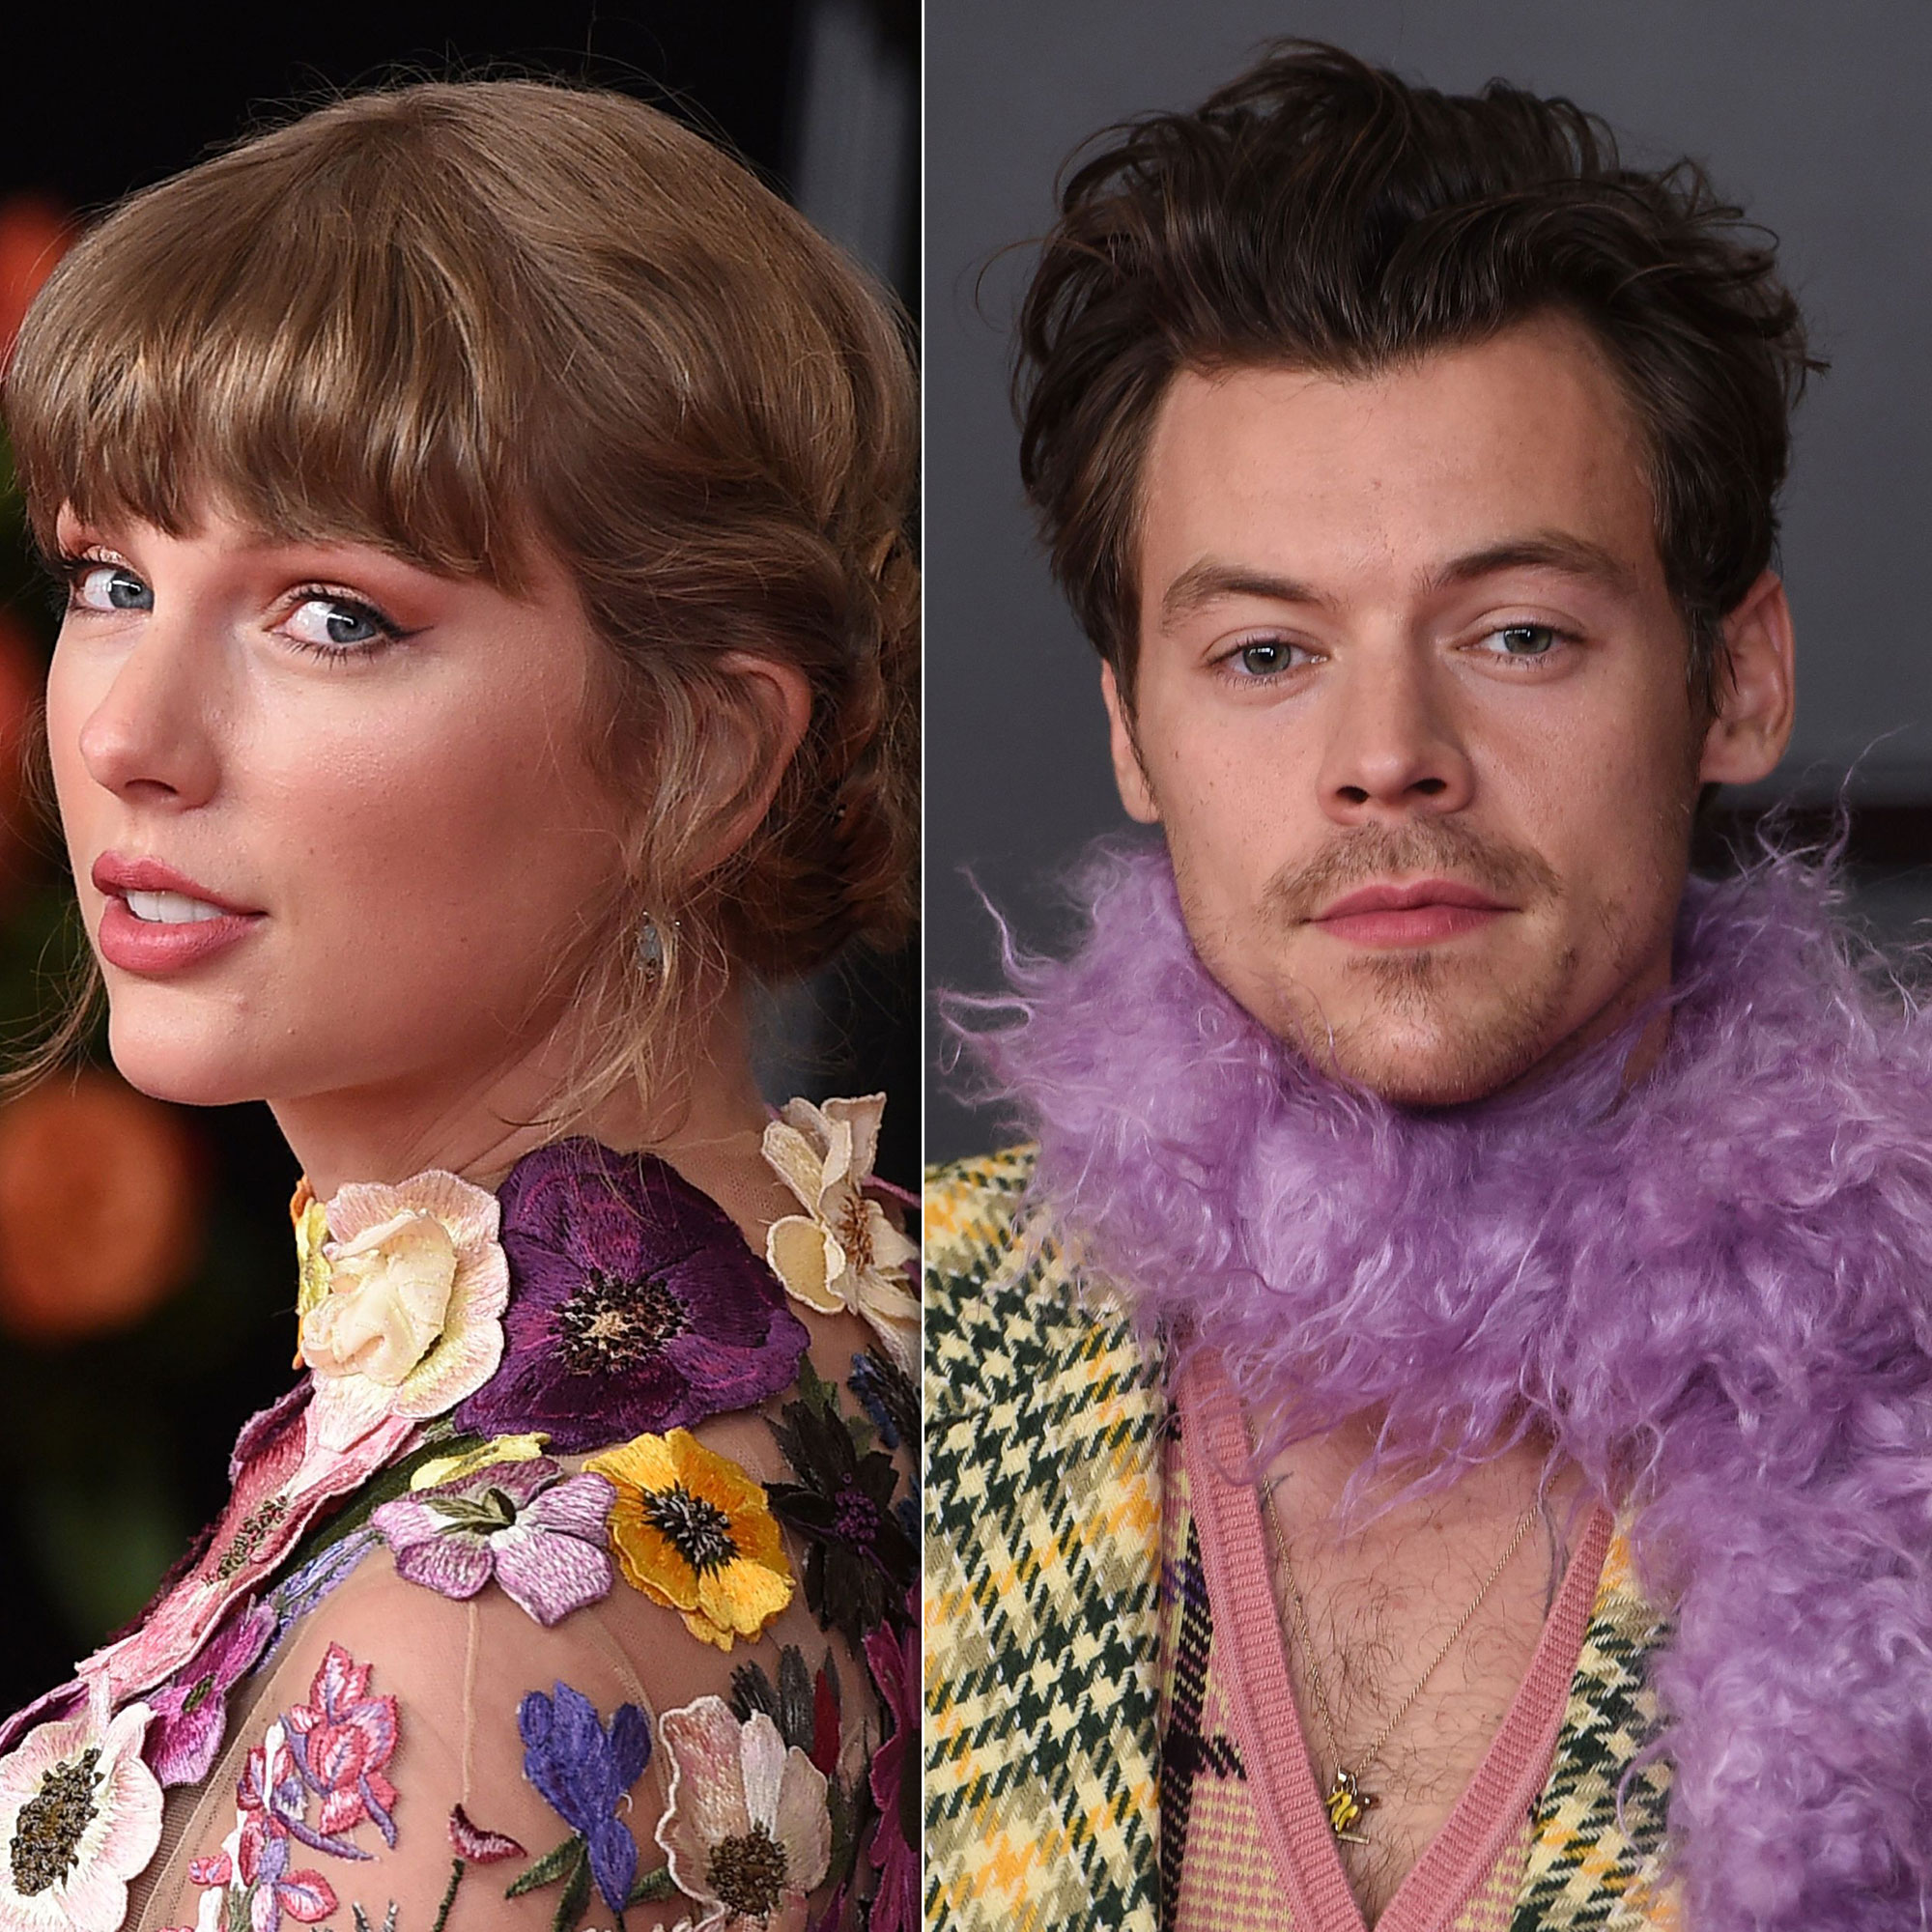 Taylor Swift Sexiest Moments - Taylor Swift, Harry Styles Reunite at 2021 Grammys: Video